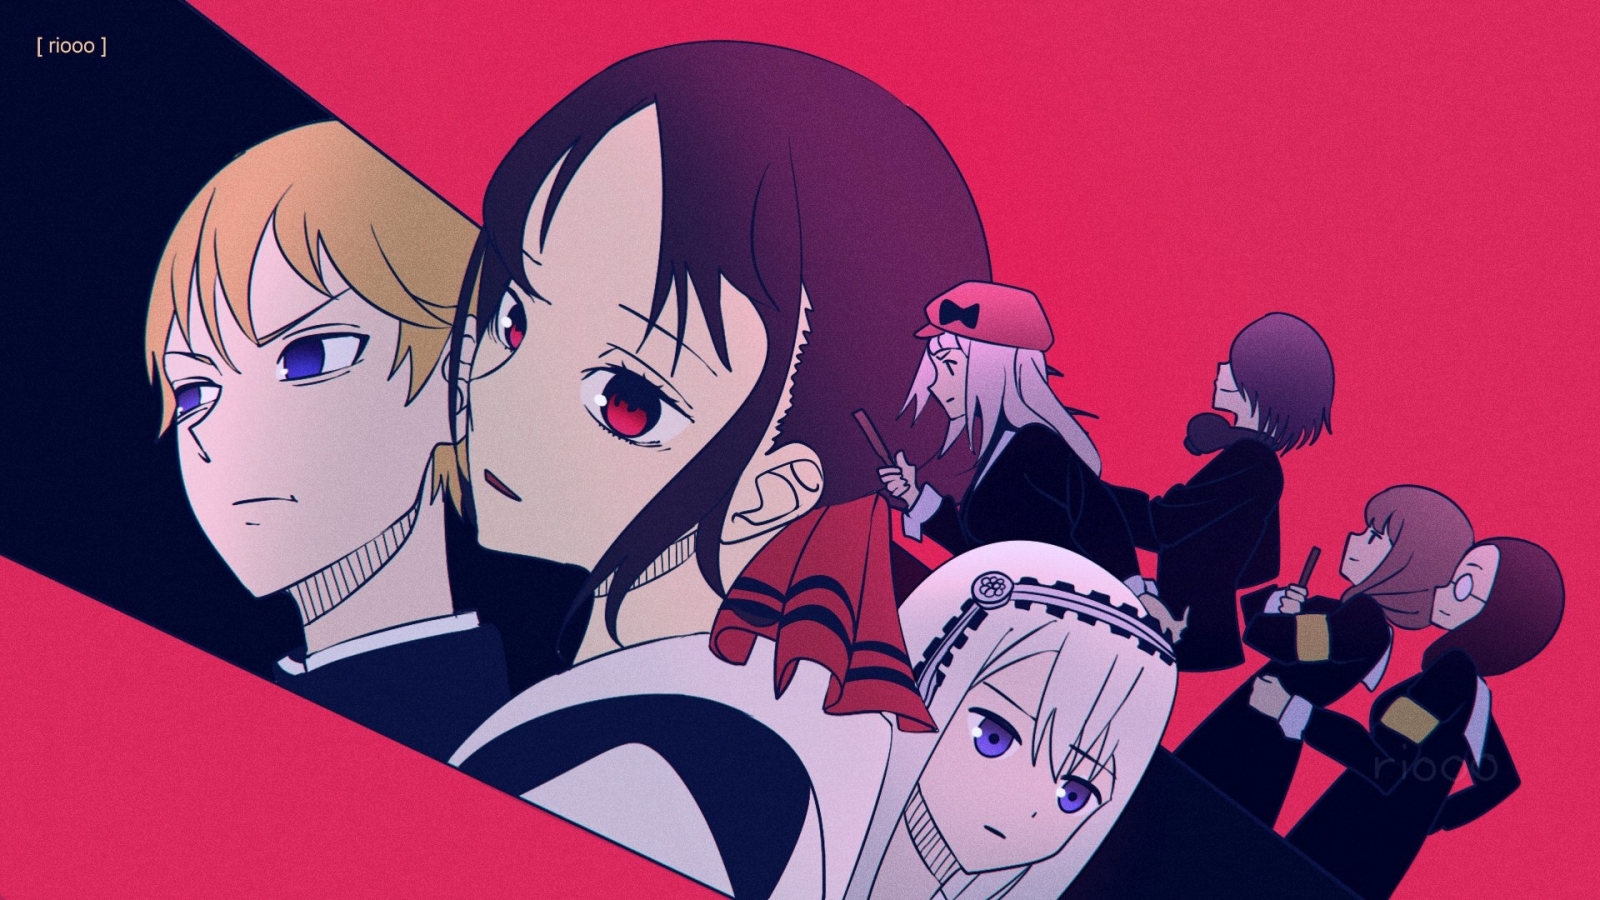 1600x900 Kaguya Sama Love Is War 1600x900 Resolution Wallpaper Hd Anime 4k Wallpapers Images Photos And Background Wallpapers Den